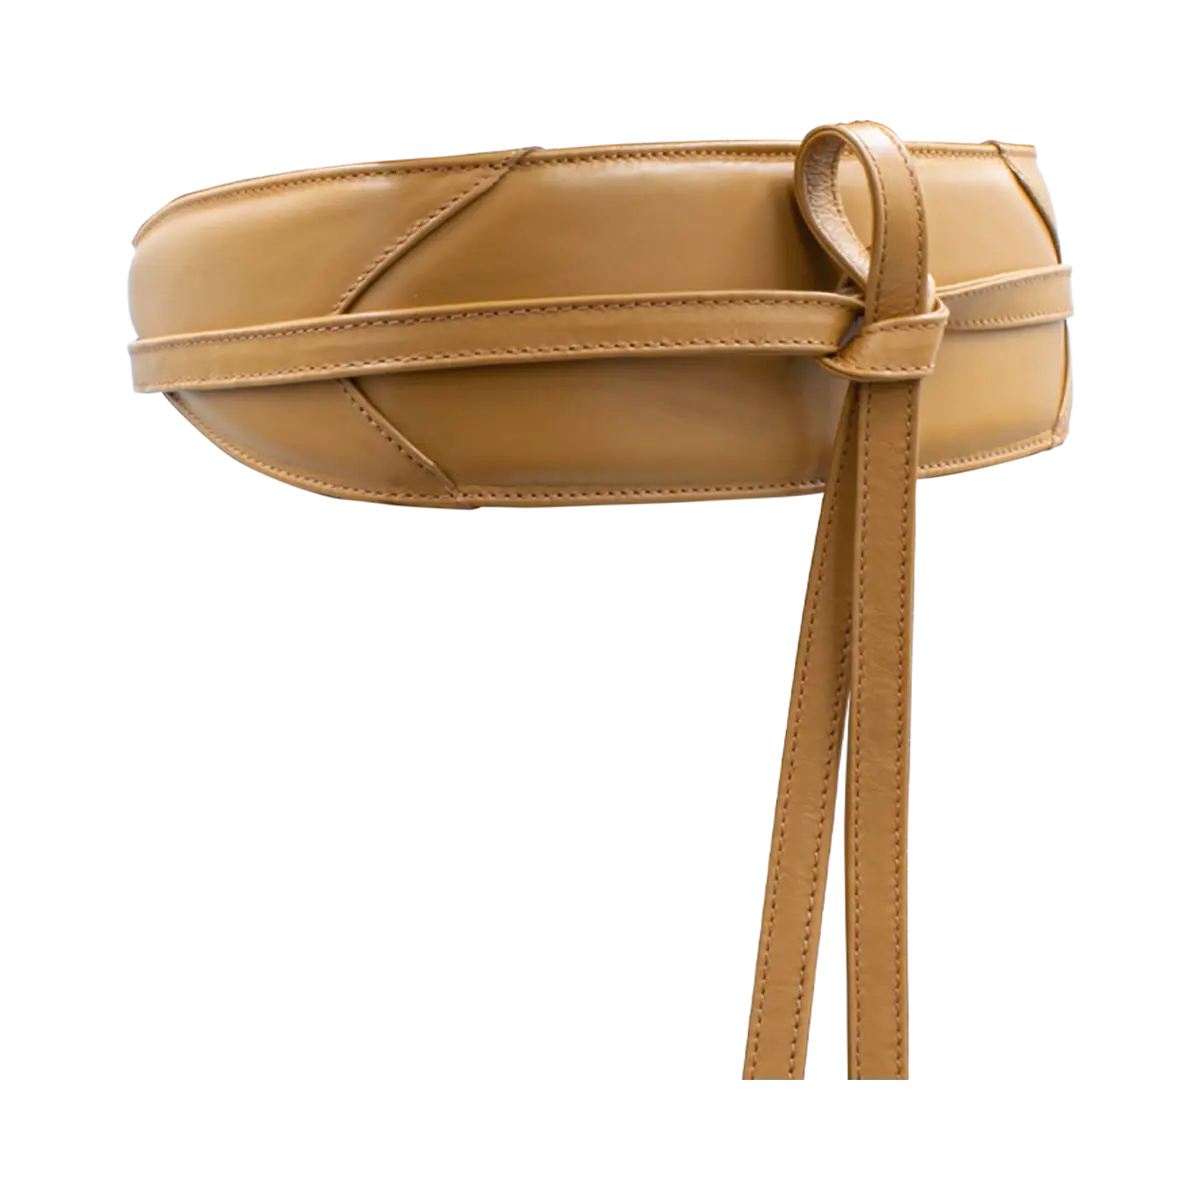 large tan wrap-around belt for women. Available in San Diego, CA.